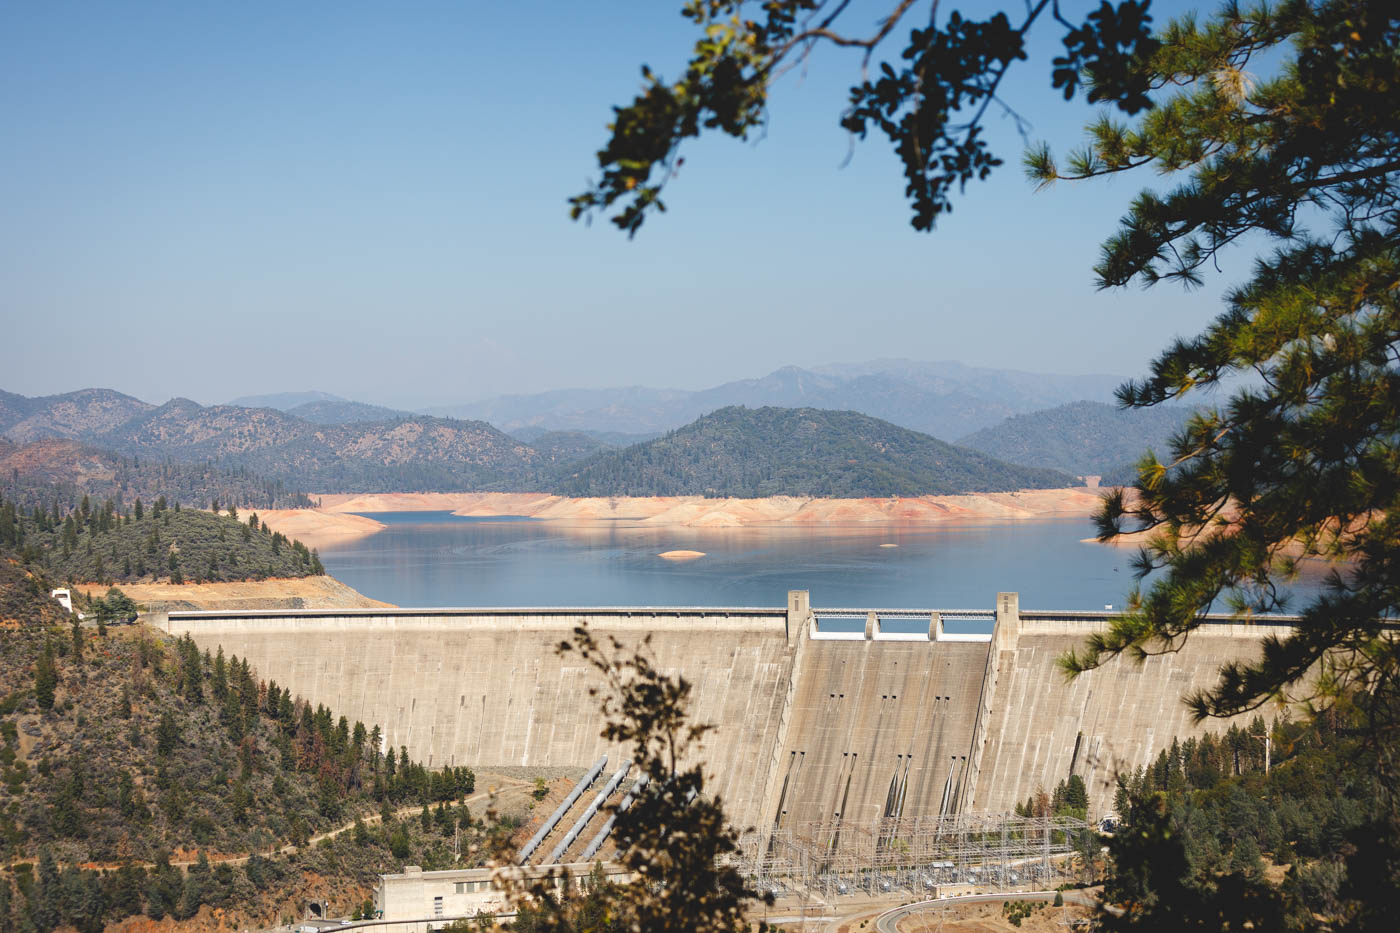 A tree-framed view of the huge, concrete Shasta Dam from the overlook nearby.